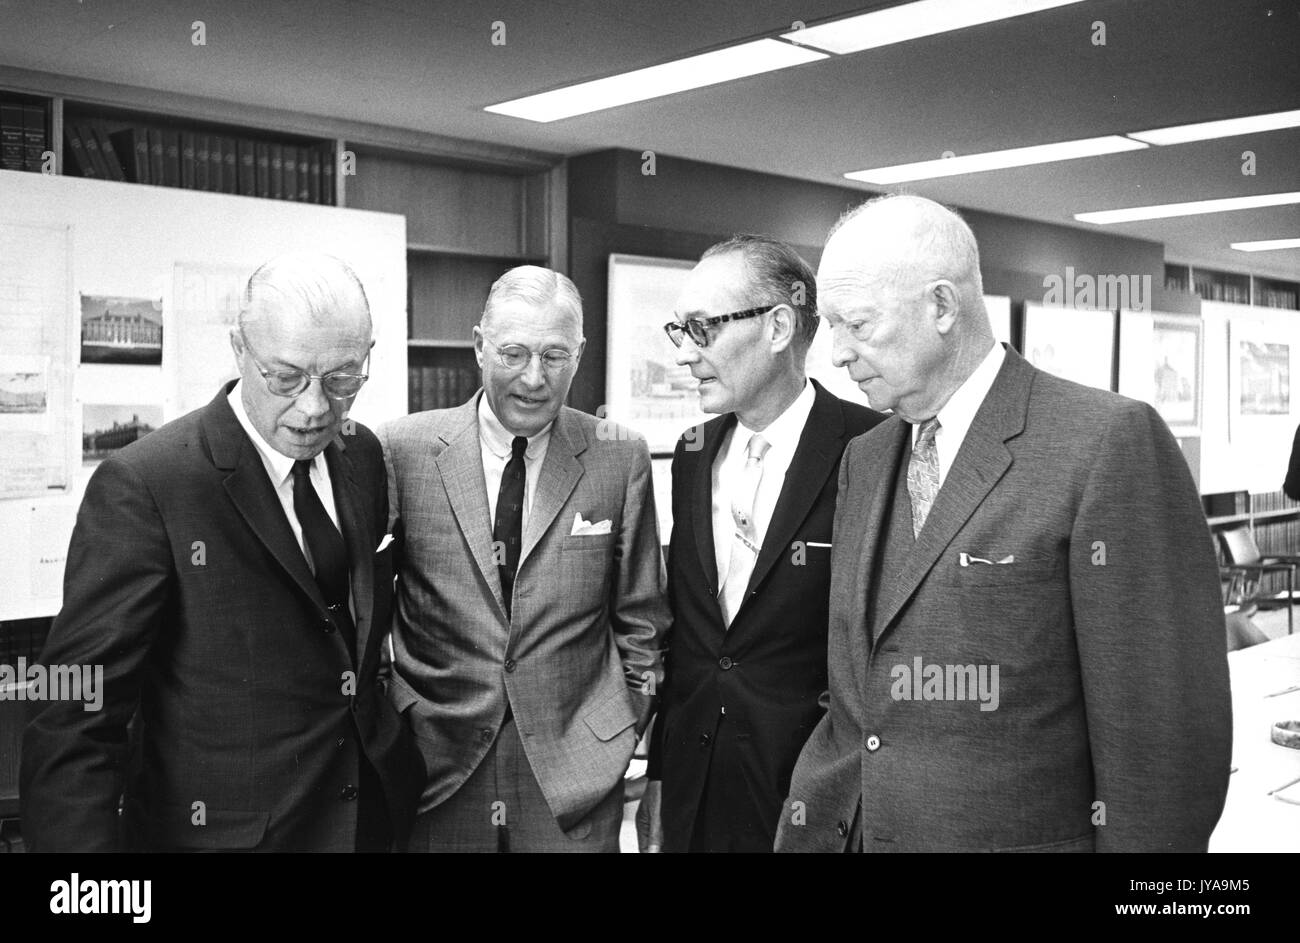 Milton Stover Eisenhower (left), president of Johns Hopkins University, and Dwight D Eisenhower (right), President of the United States, standing and conversing with two gentlemen, 1965. Stock Photo